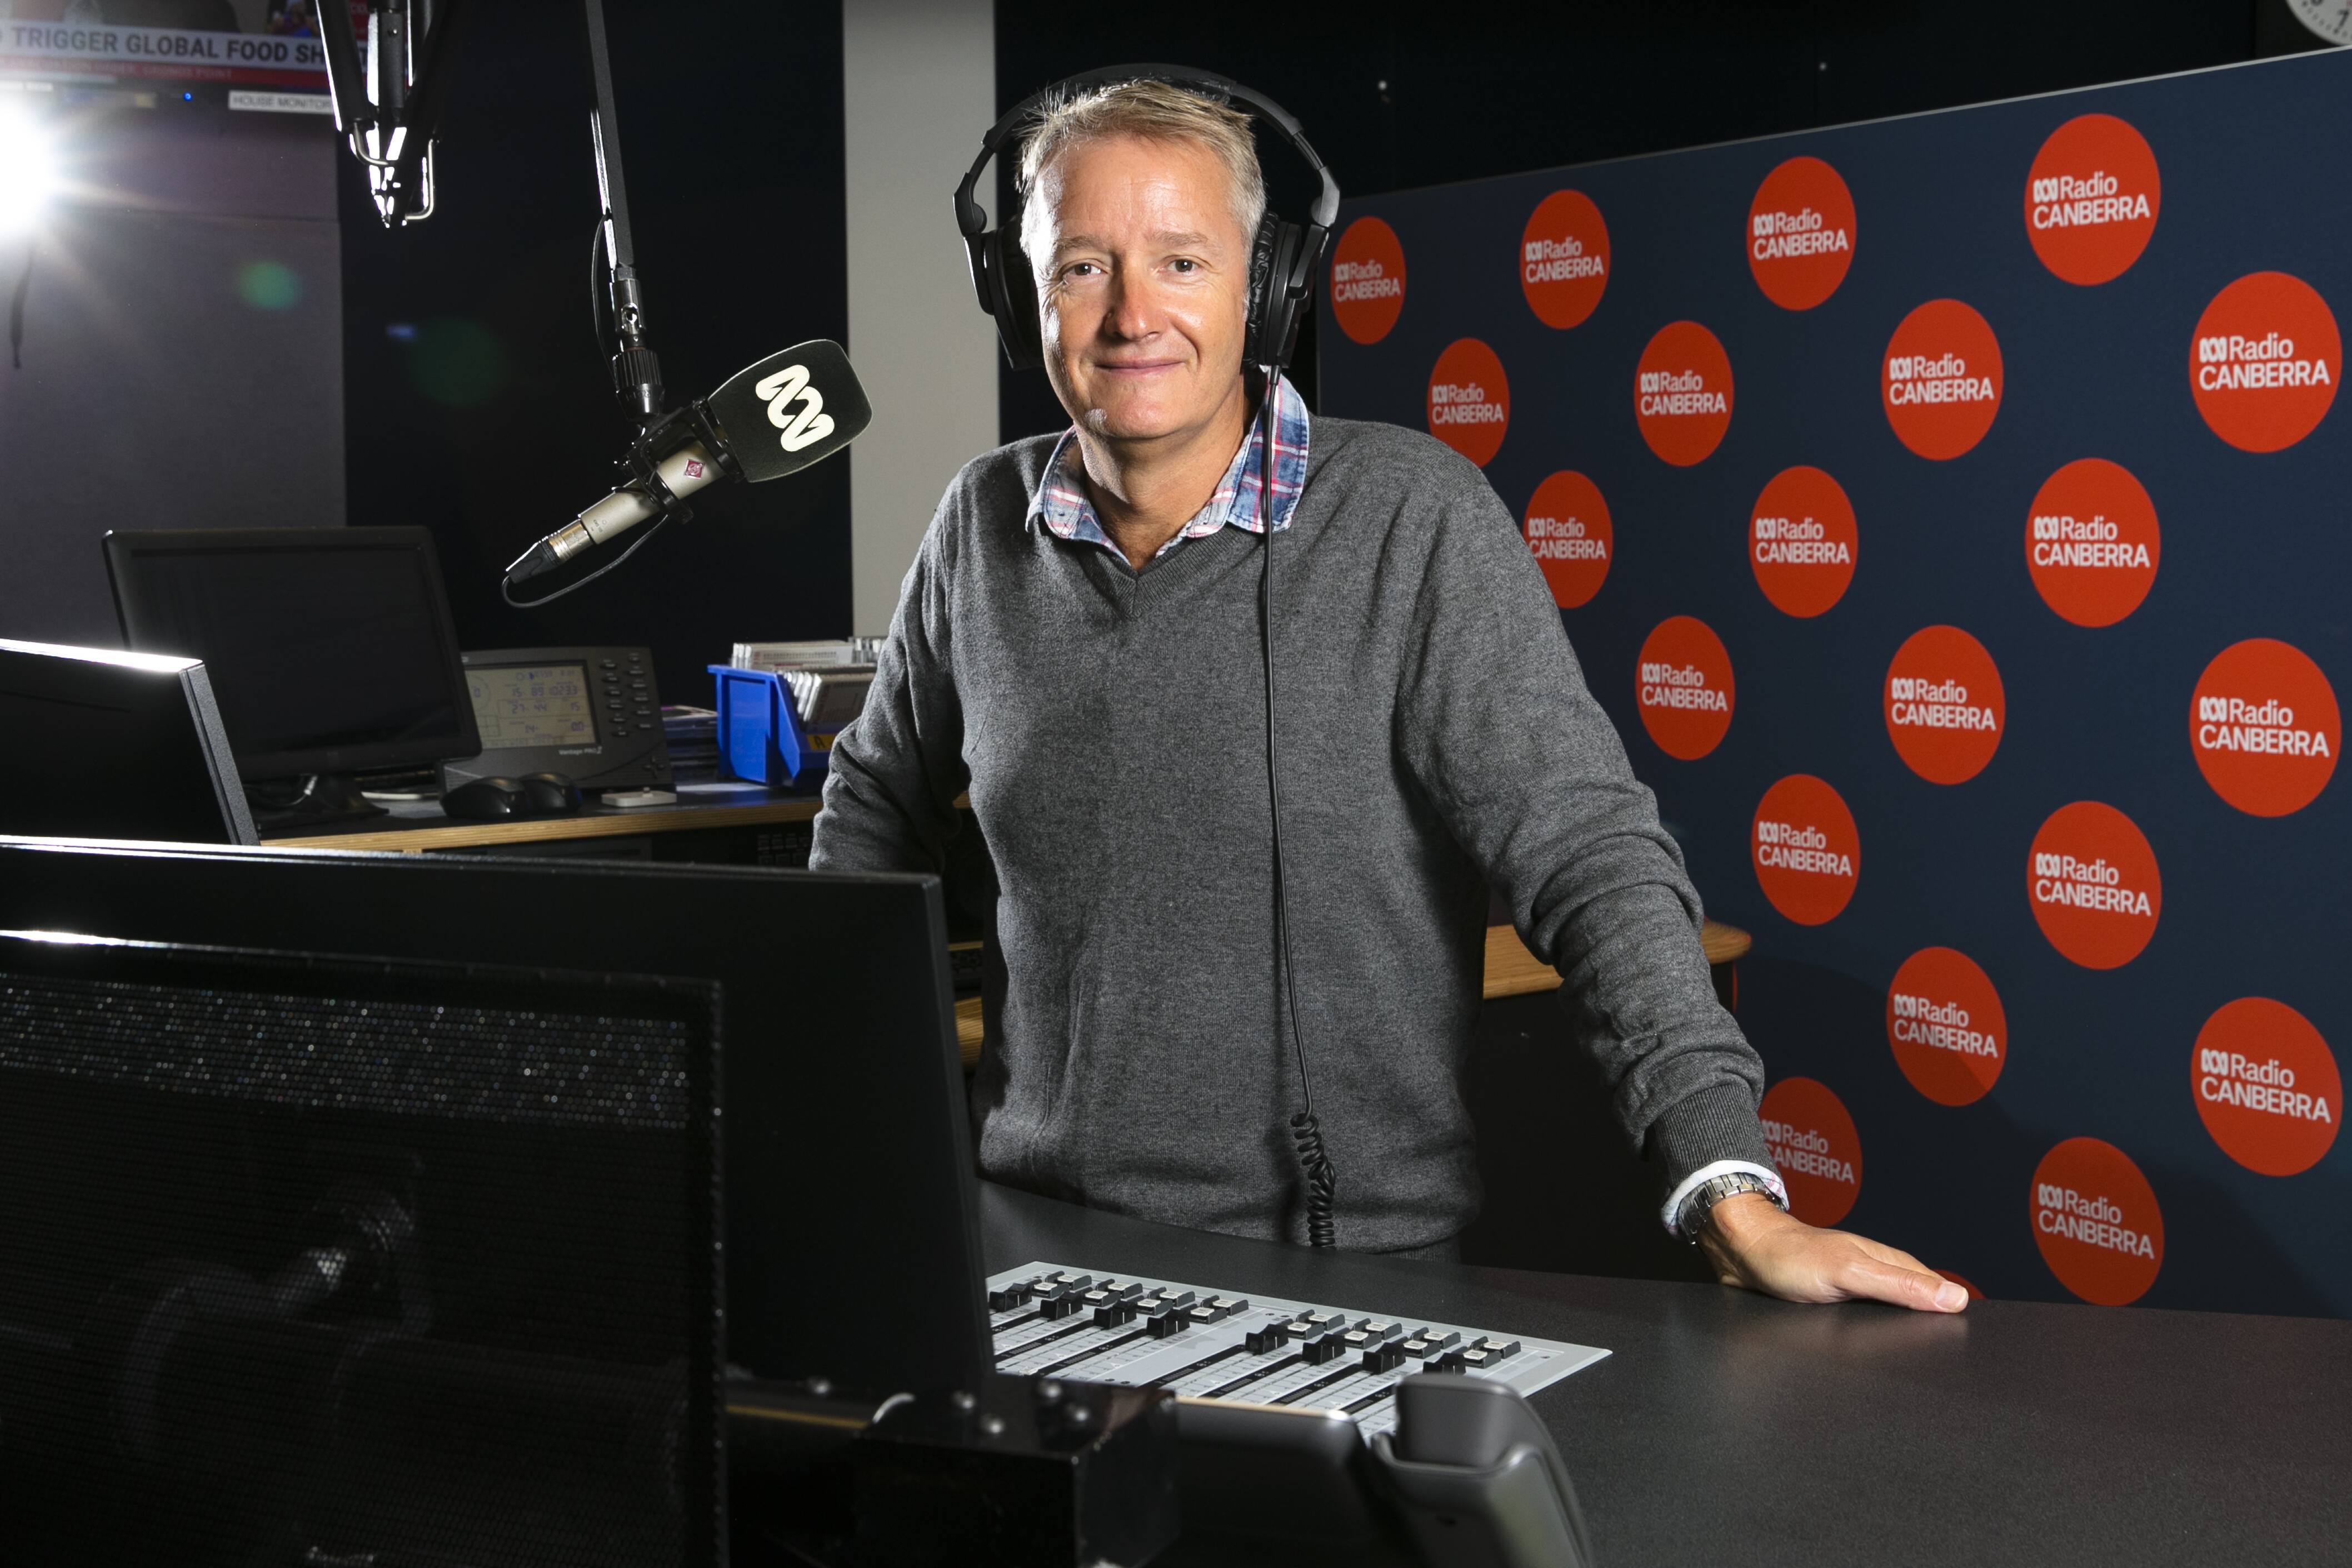 Ross Solly returns to ABC Radio Canberra airwaves The Canberra Times Canberra, ACT